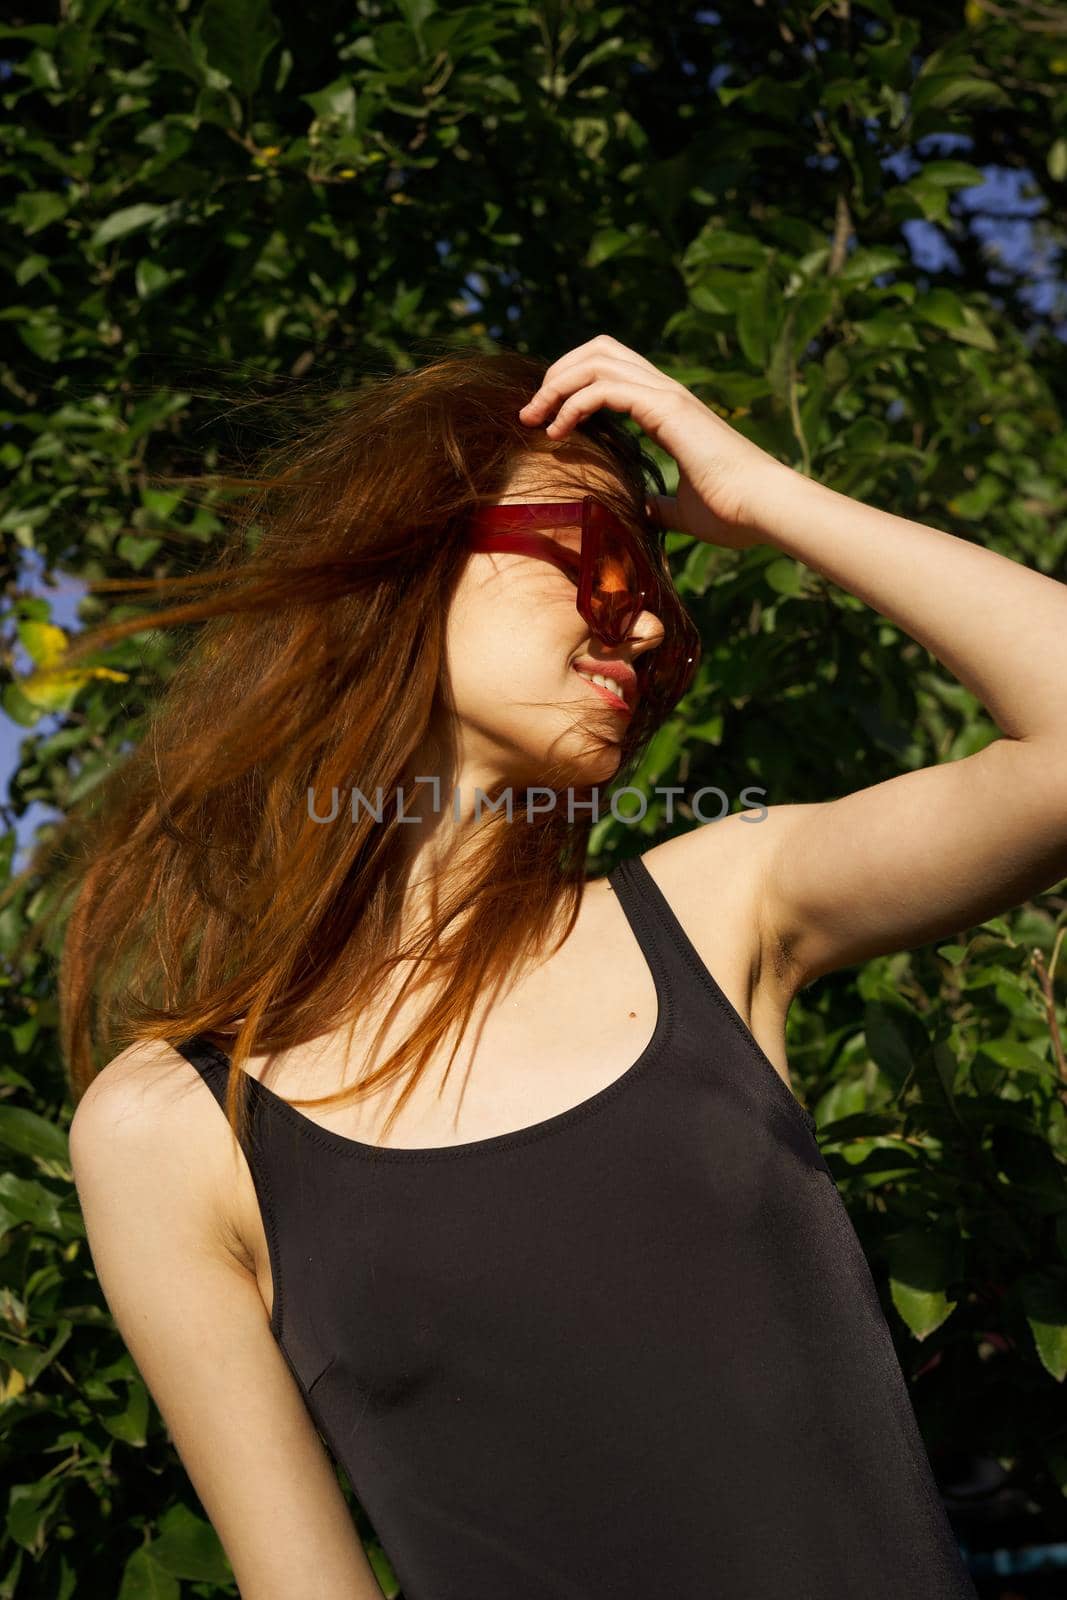 pretty woman wearing sunglasses green leaves summer model. High quality photo